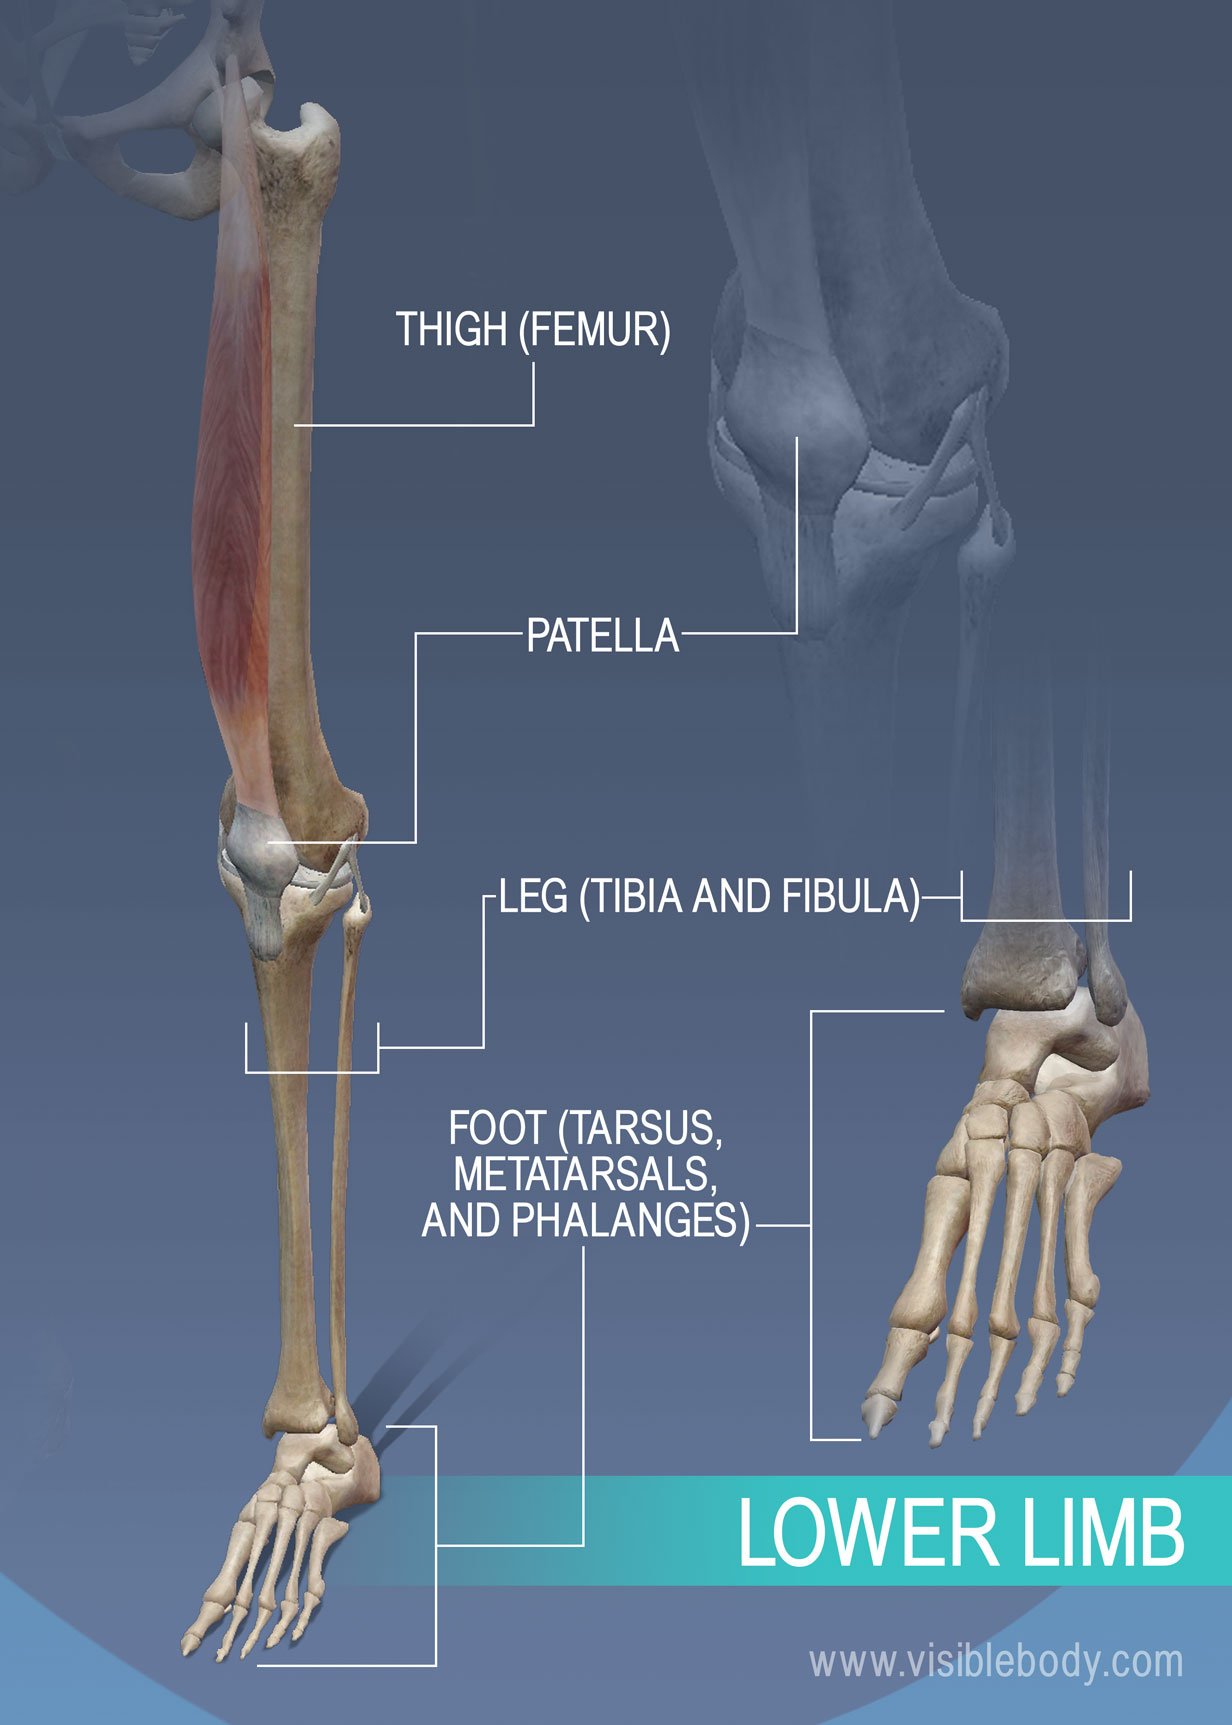 Thigh, leg, and ankle bones of the lower limb